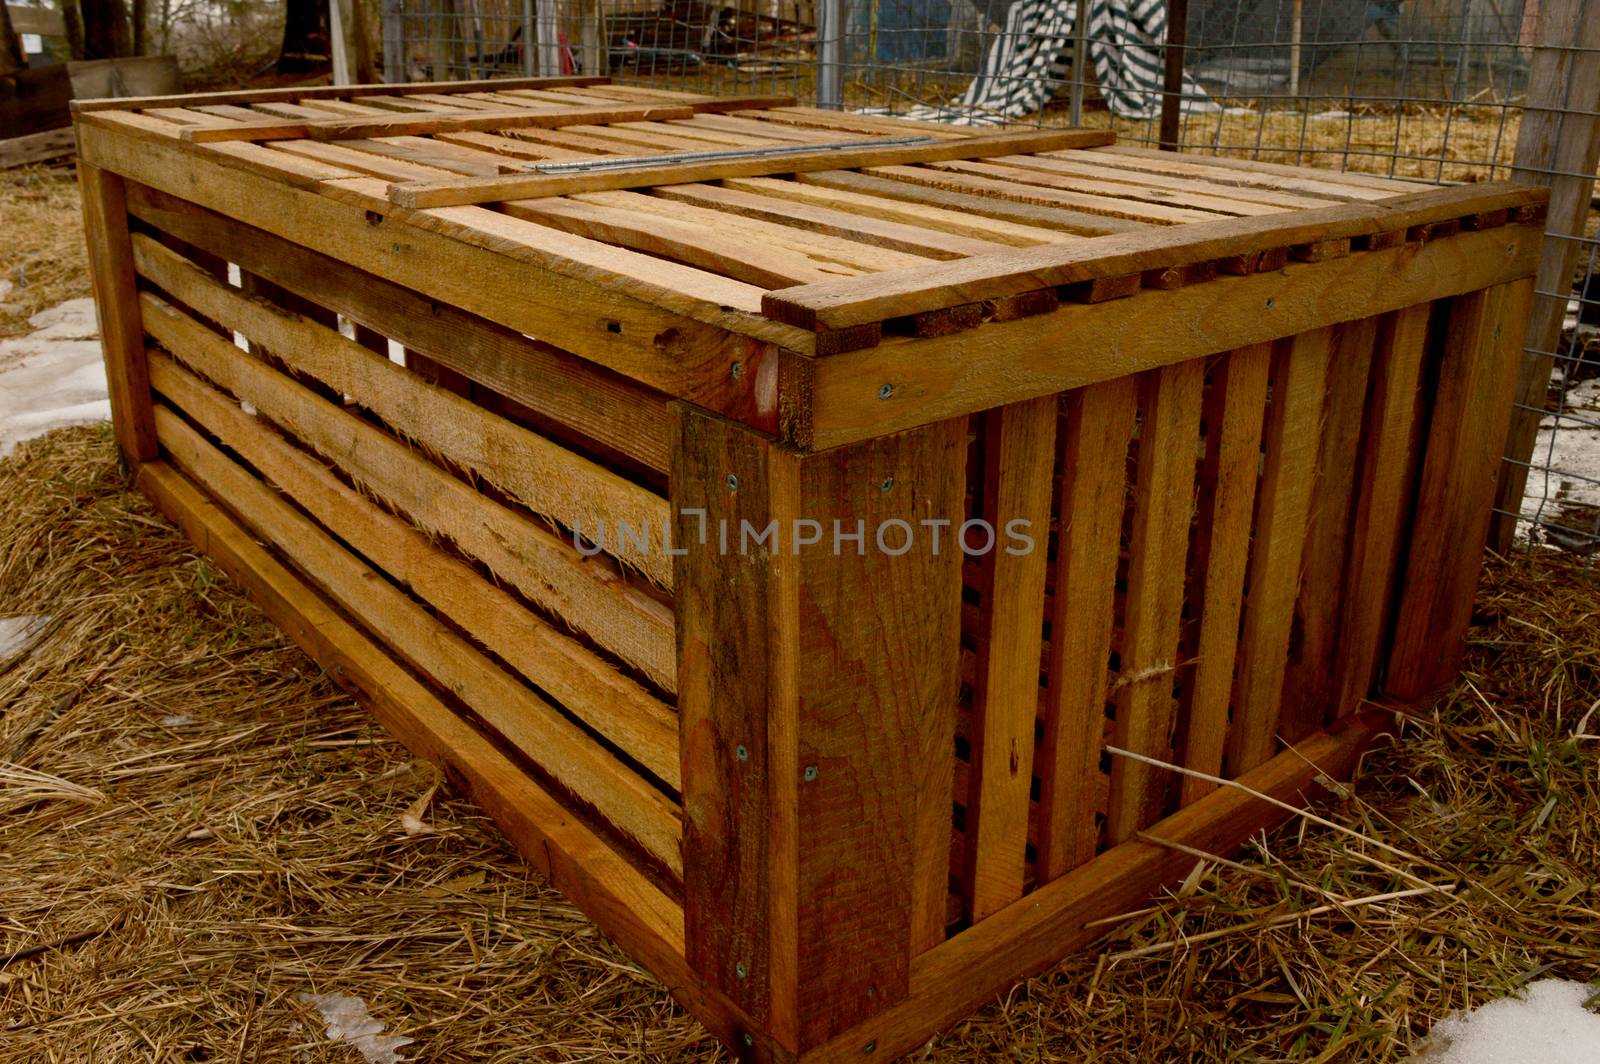 An empty livestock crate used for shipping animals to the farm.